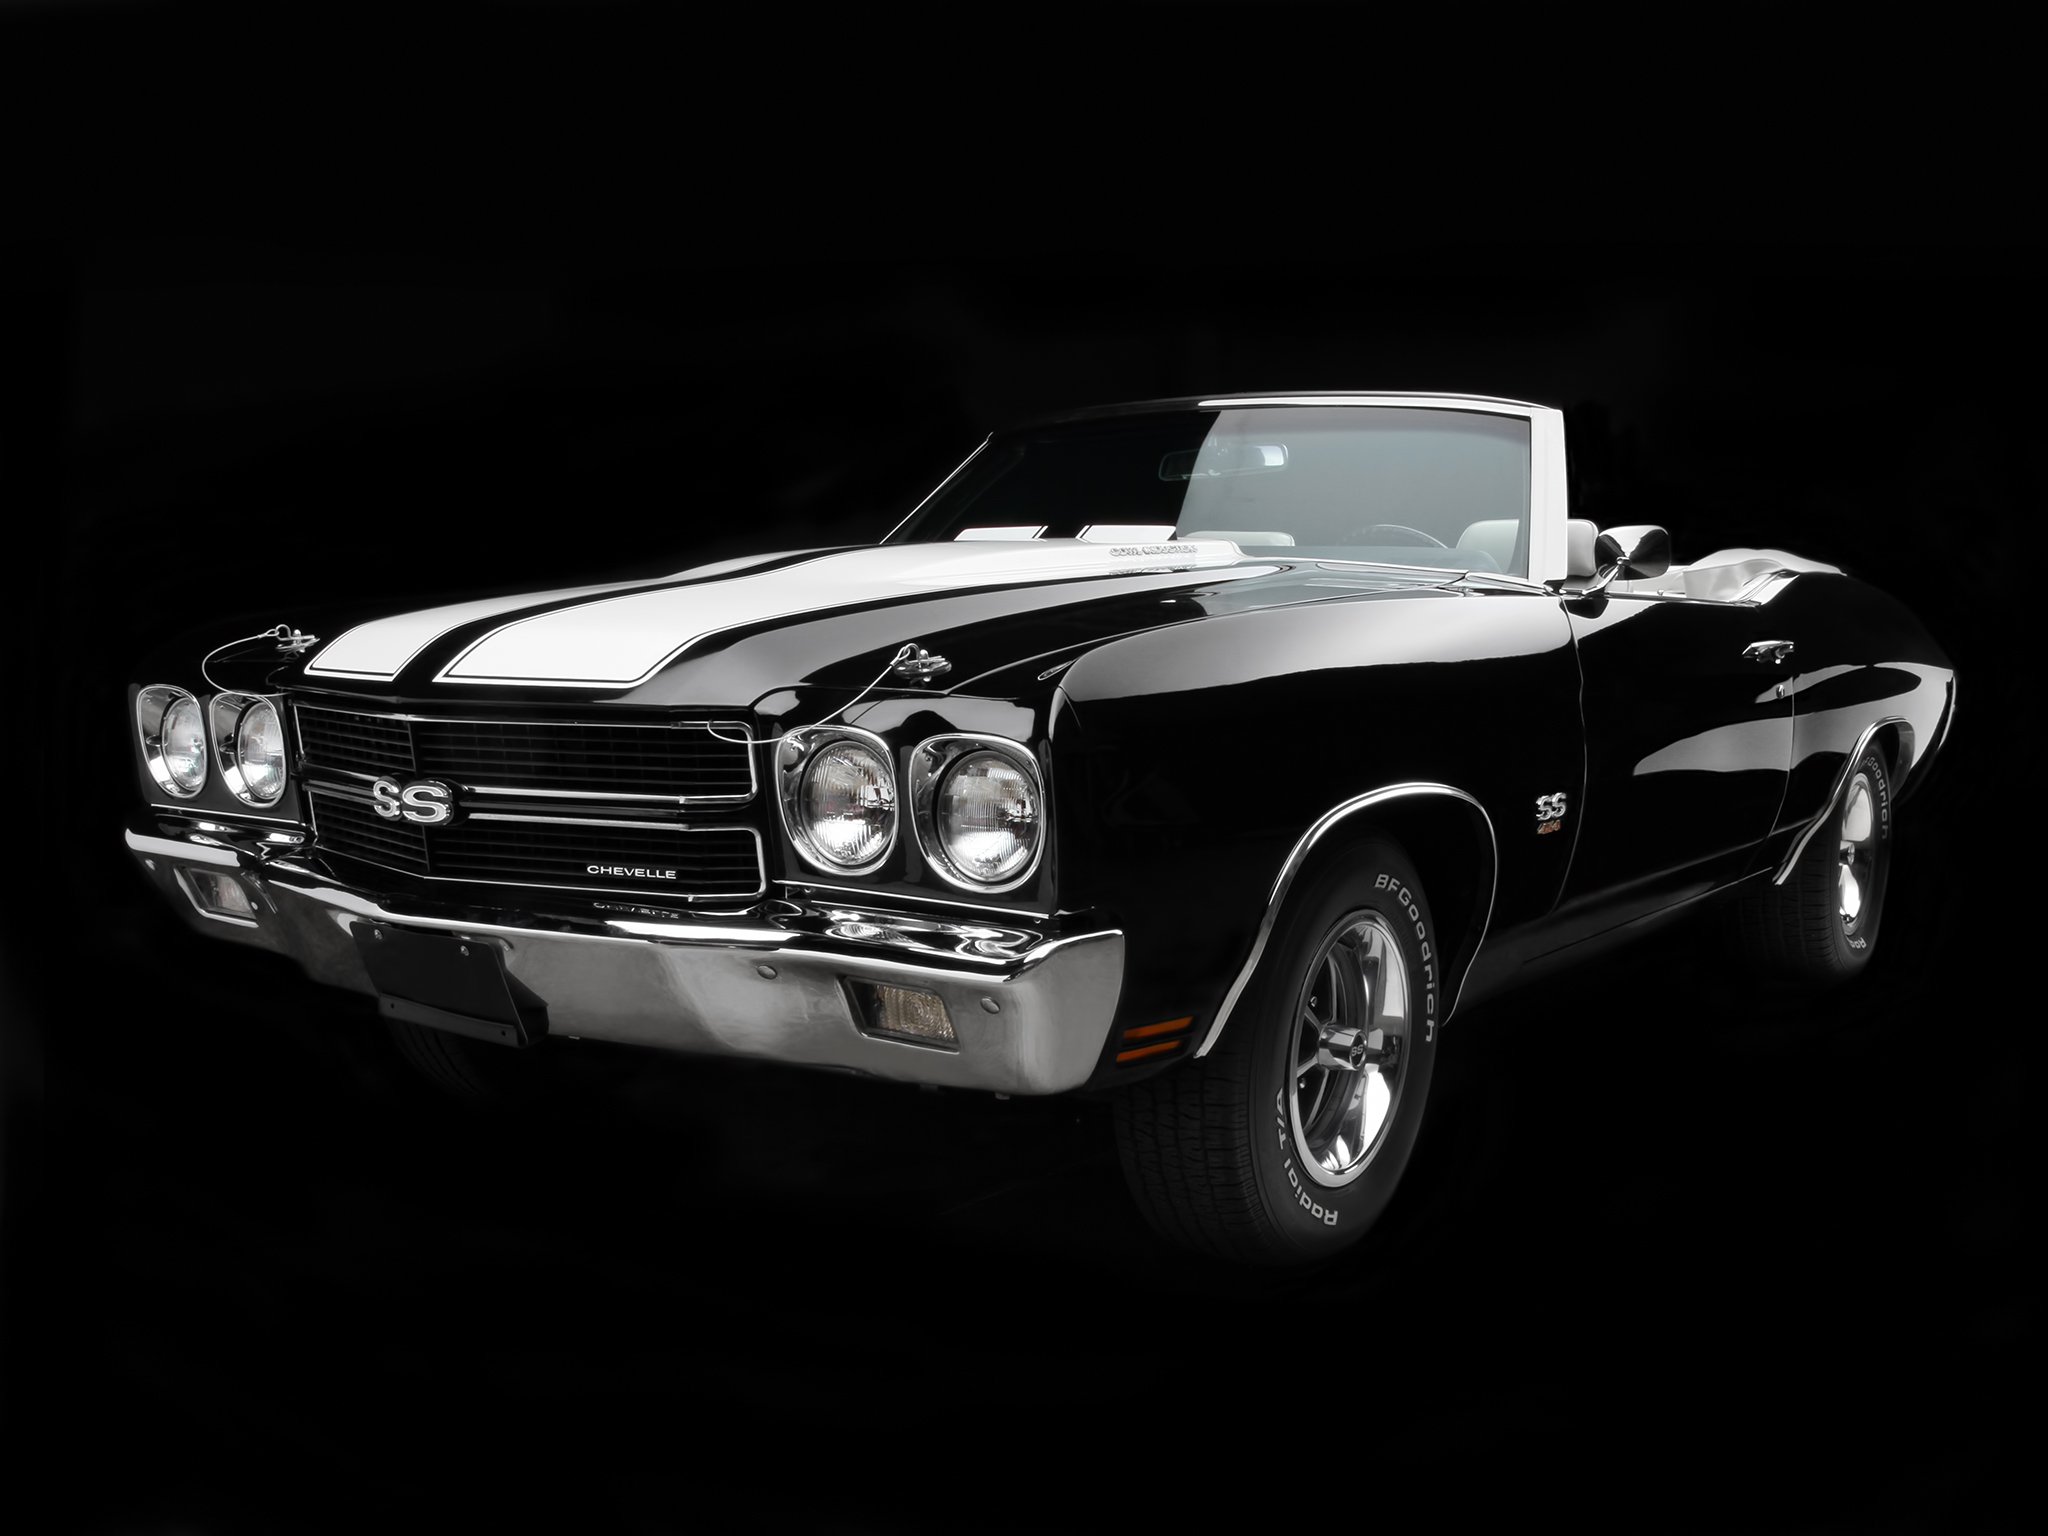 1970 Chevrolet Chevelle S S 454 LS6 Convertible muscle